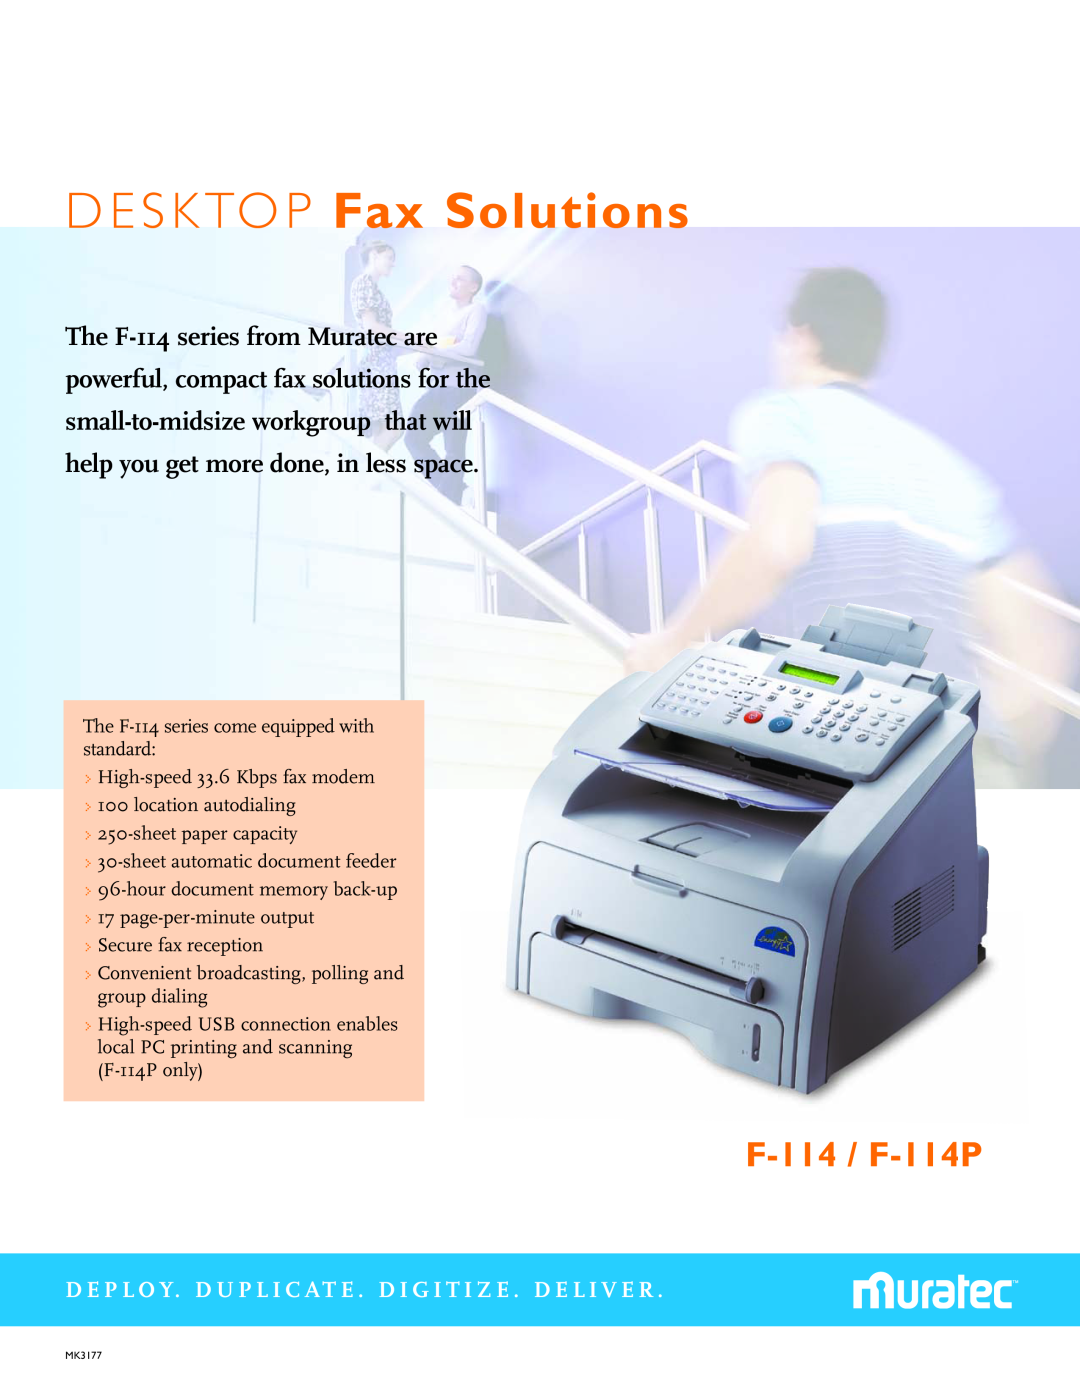 Muratec manual D E S K TO P Fax Solutions, F-114 / F-114P 